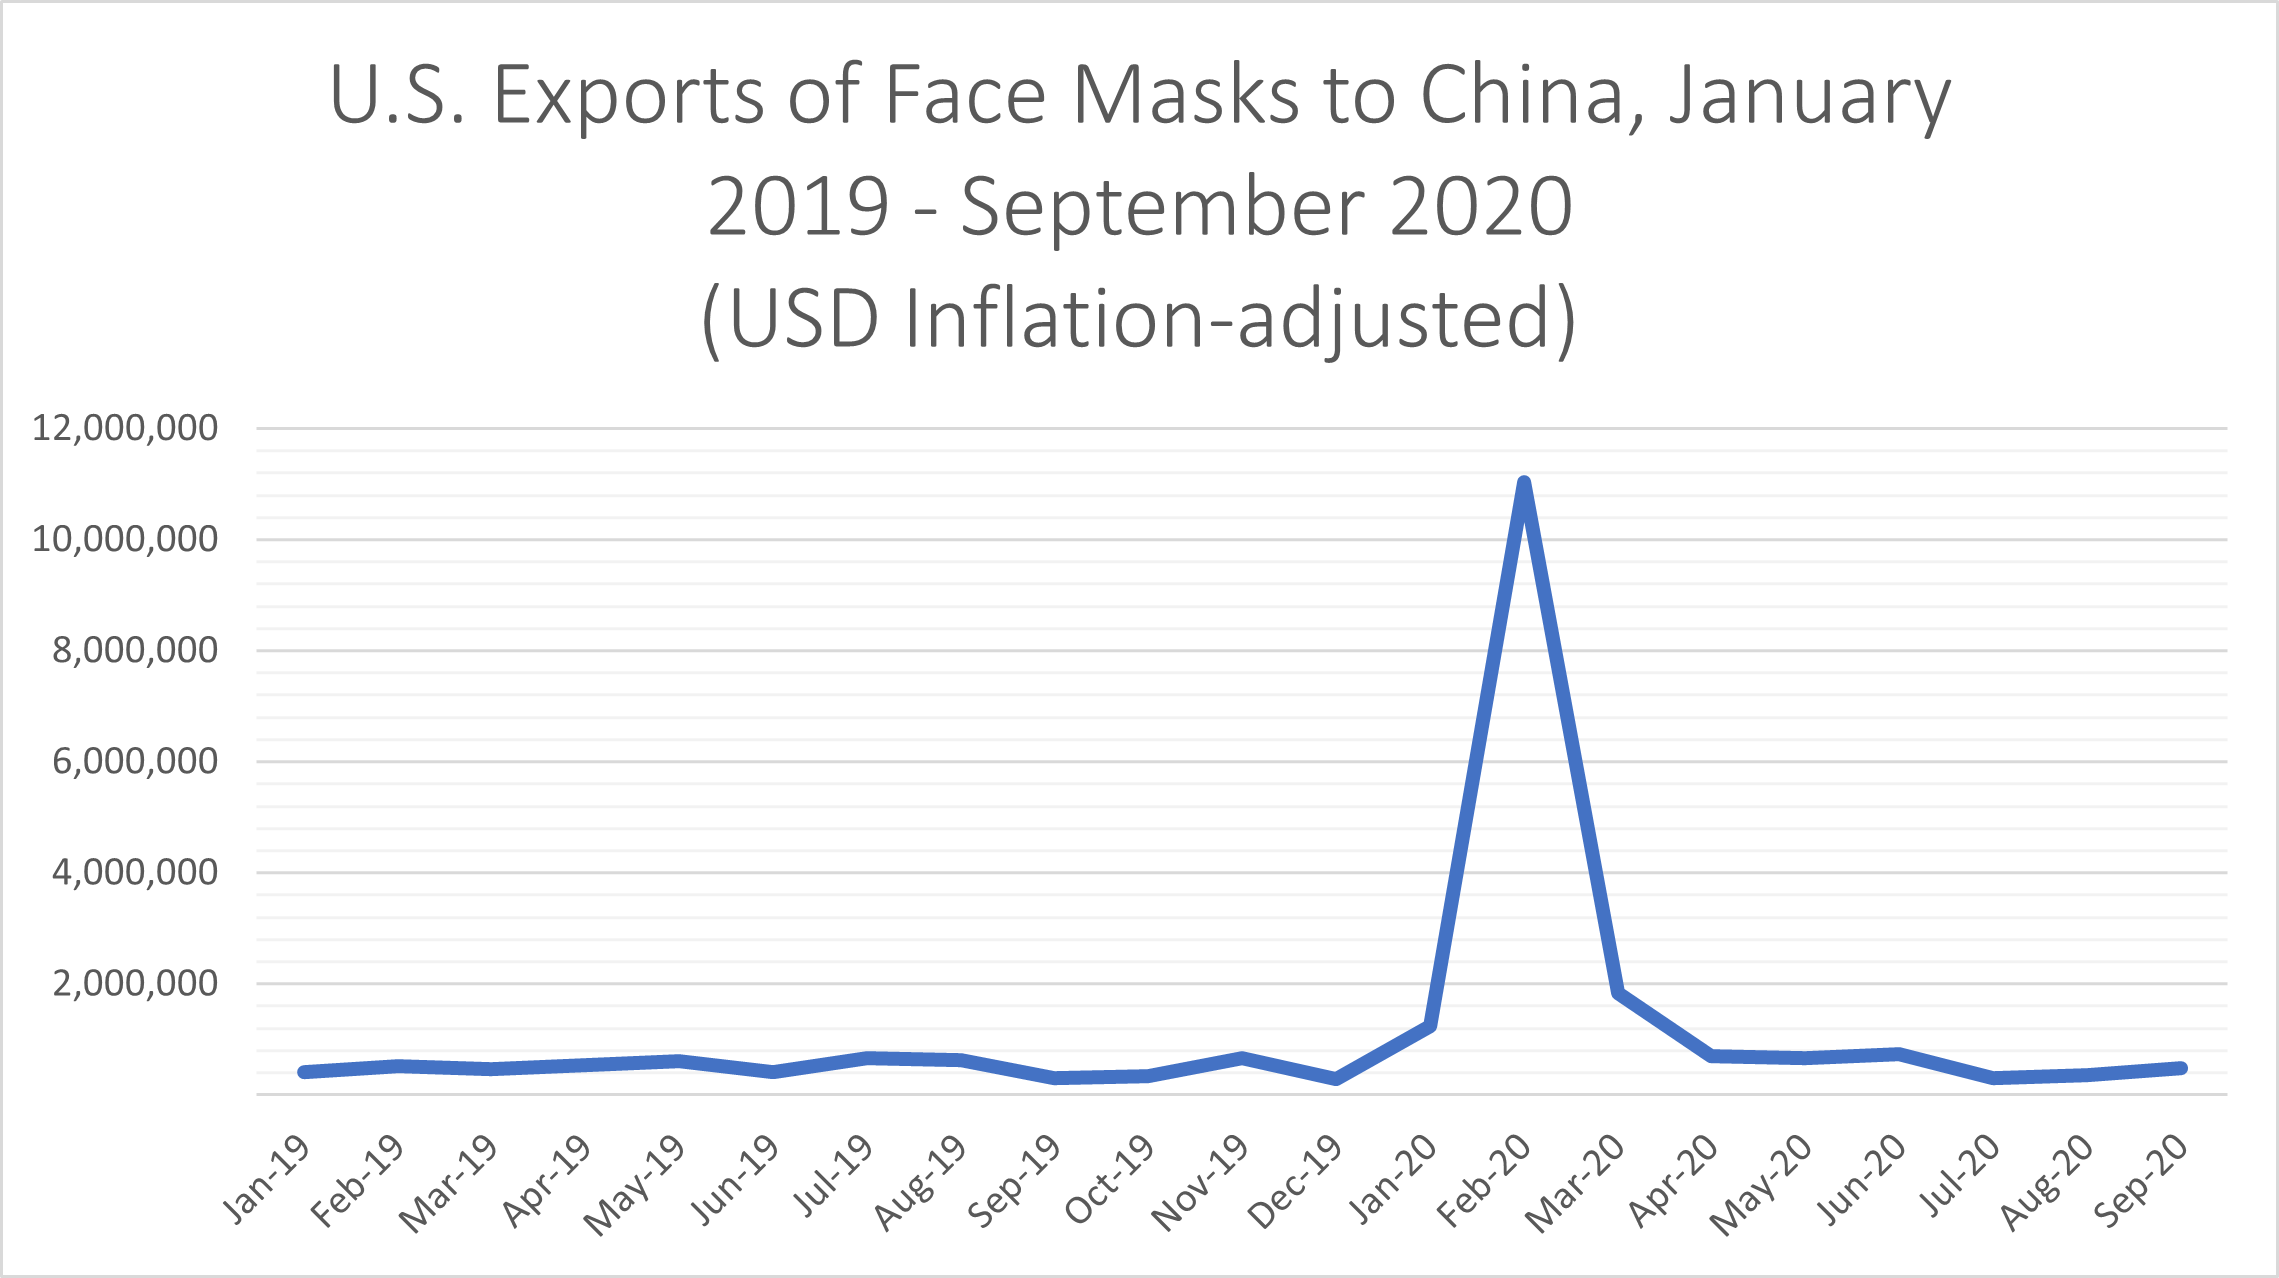 U.S. EXPORTS OF FACE MASKS TO CHINA BY MONTH